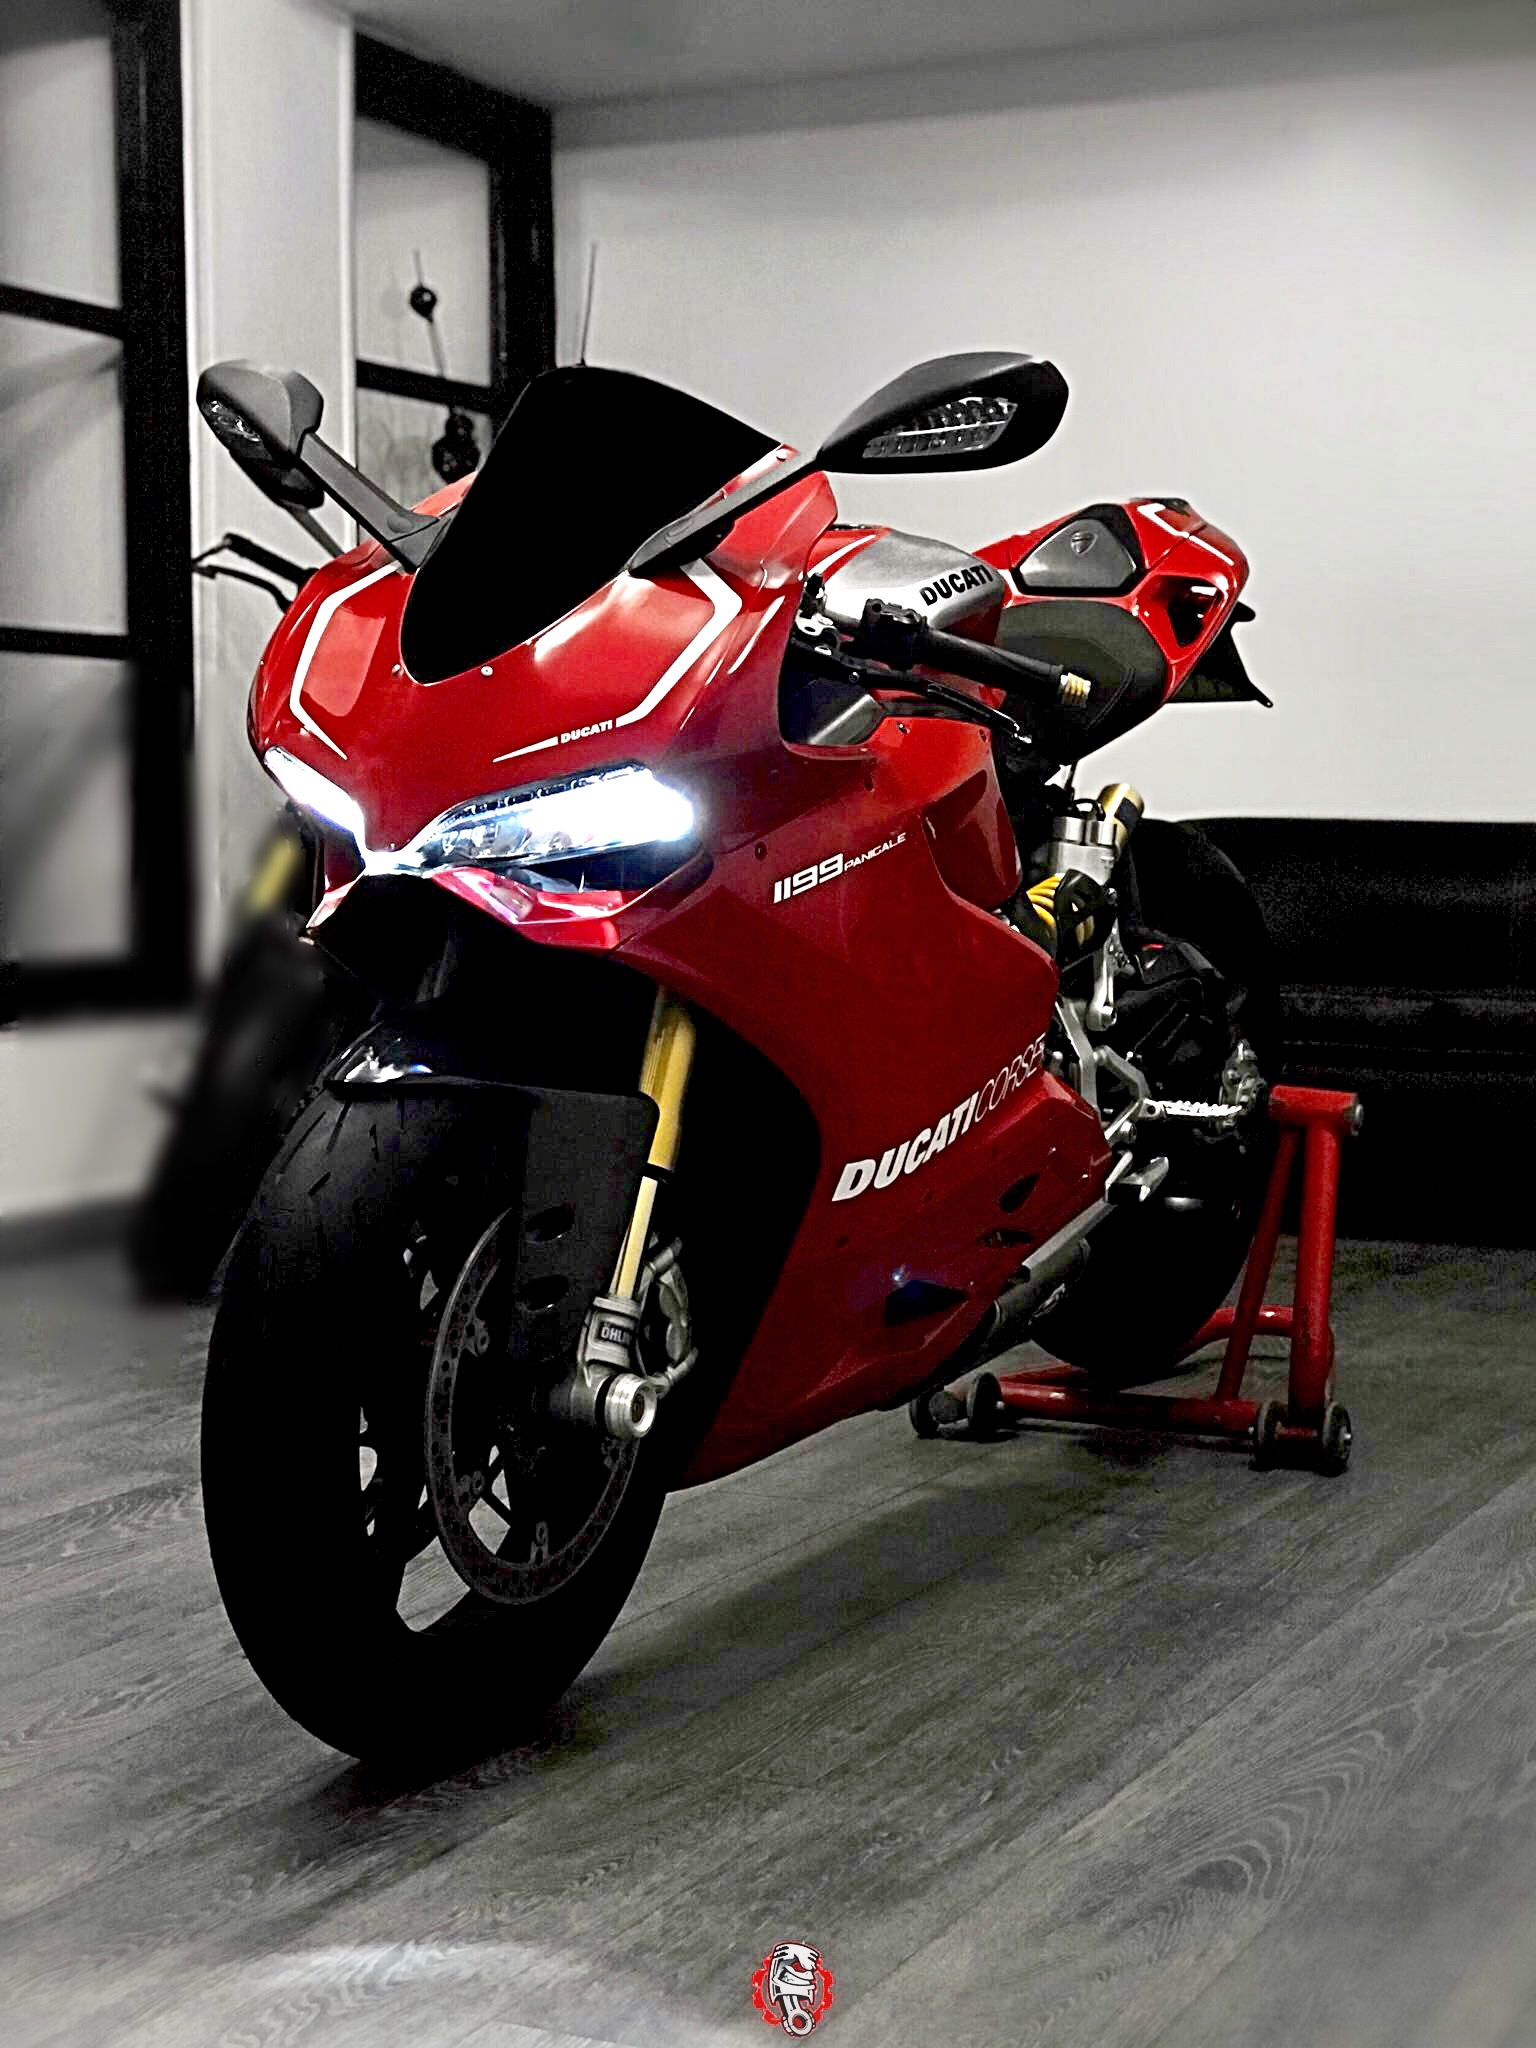 for sale - ducati panigale 1199 r (2014)